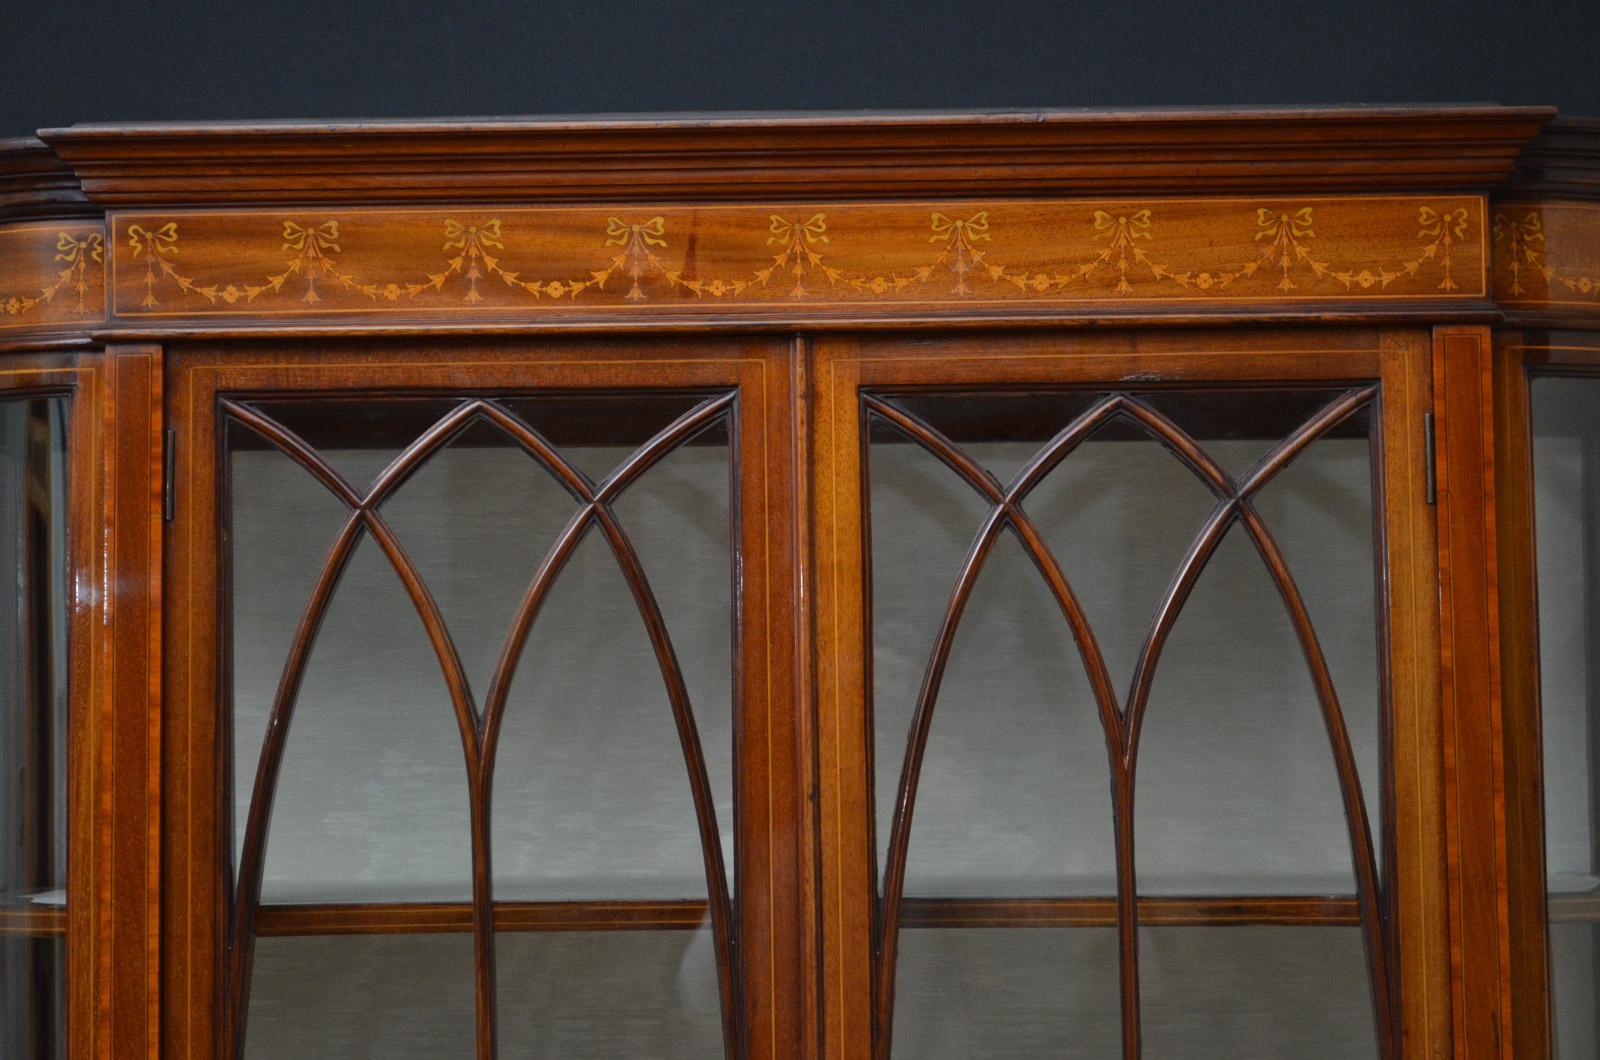 Sn4434, exceptional, mahogany display cabinet, having moulded cornice with harebells and swags inlaid frieze, a pair of glazed doors fitted with original brass handles and enclosing lined interior with 2 shelves, flanked by bowed ends and further